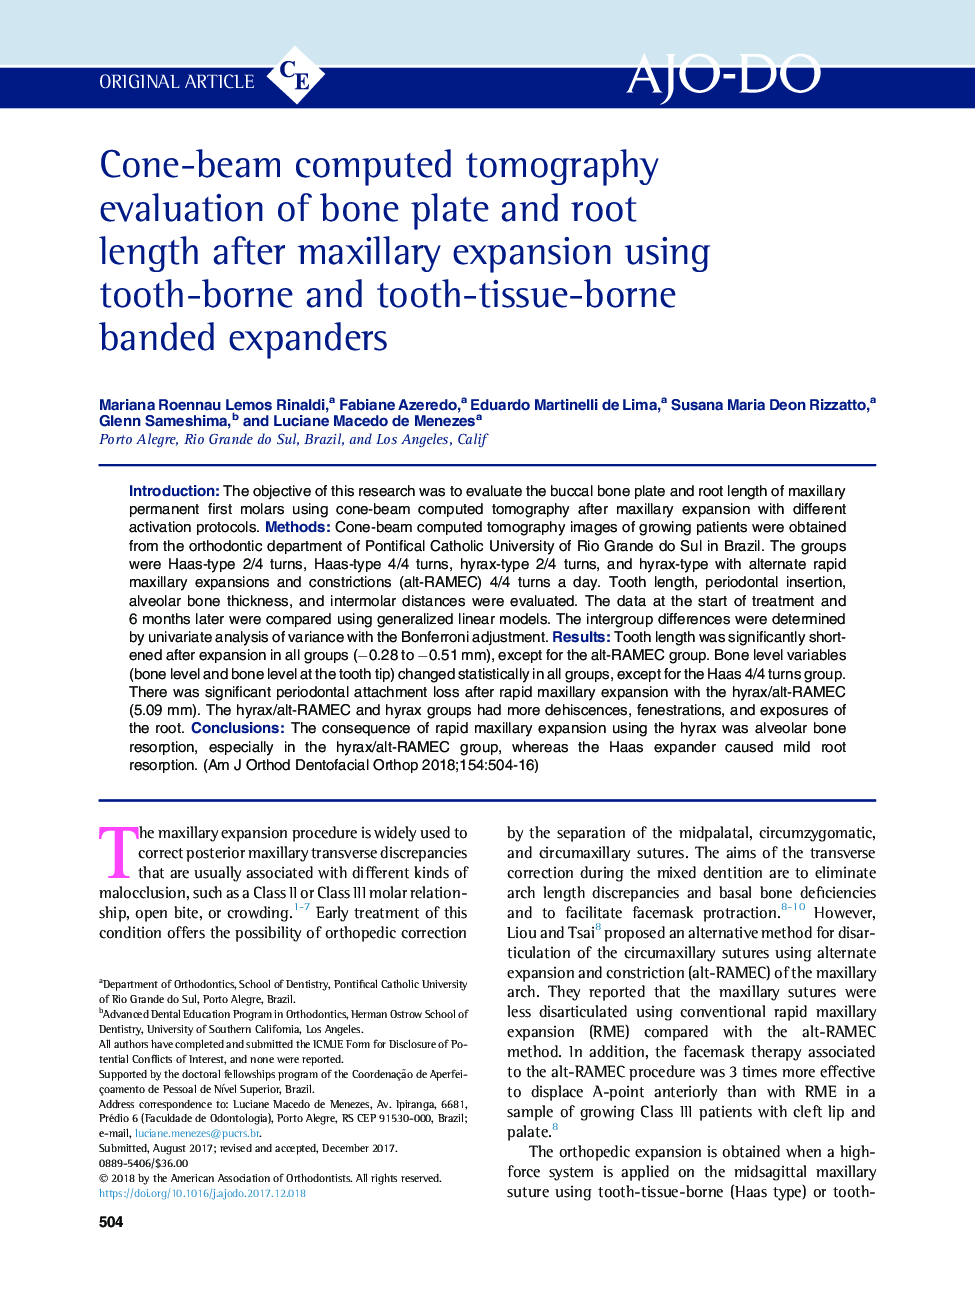 Cone-beam computed tomography evaluation of bone plate and root length after maxillary expansion using tooth-borne and tooth-tissue-borne banded expanders